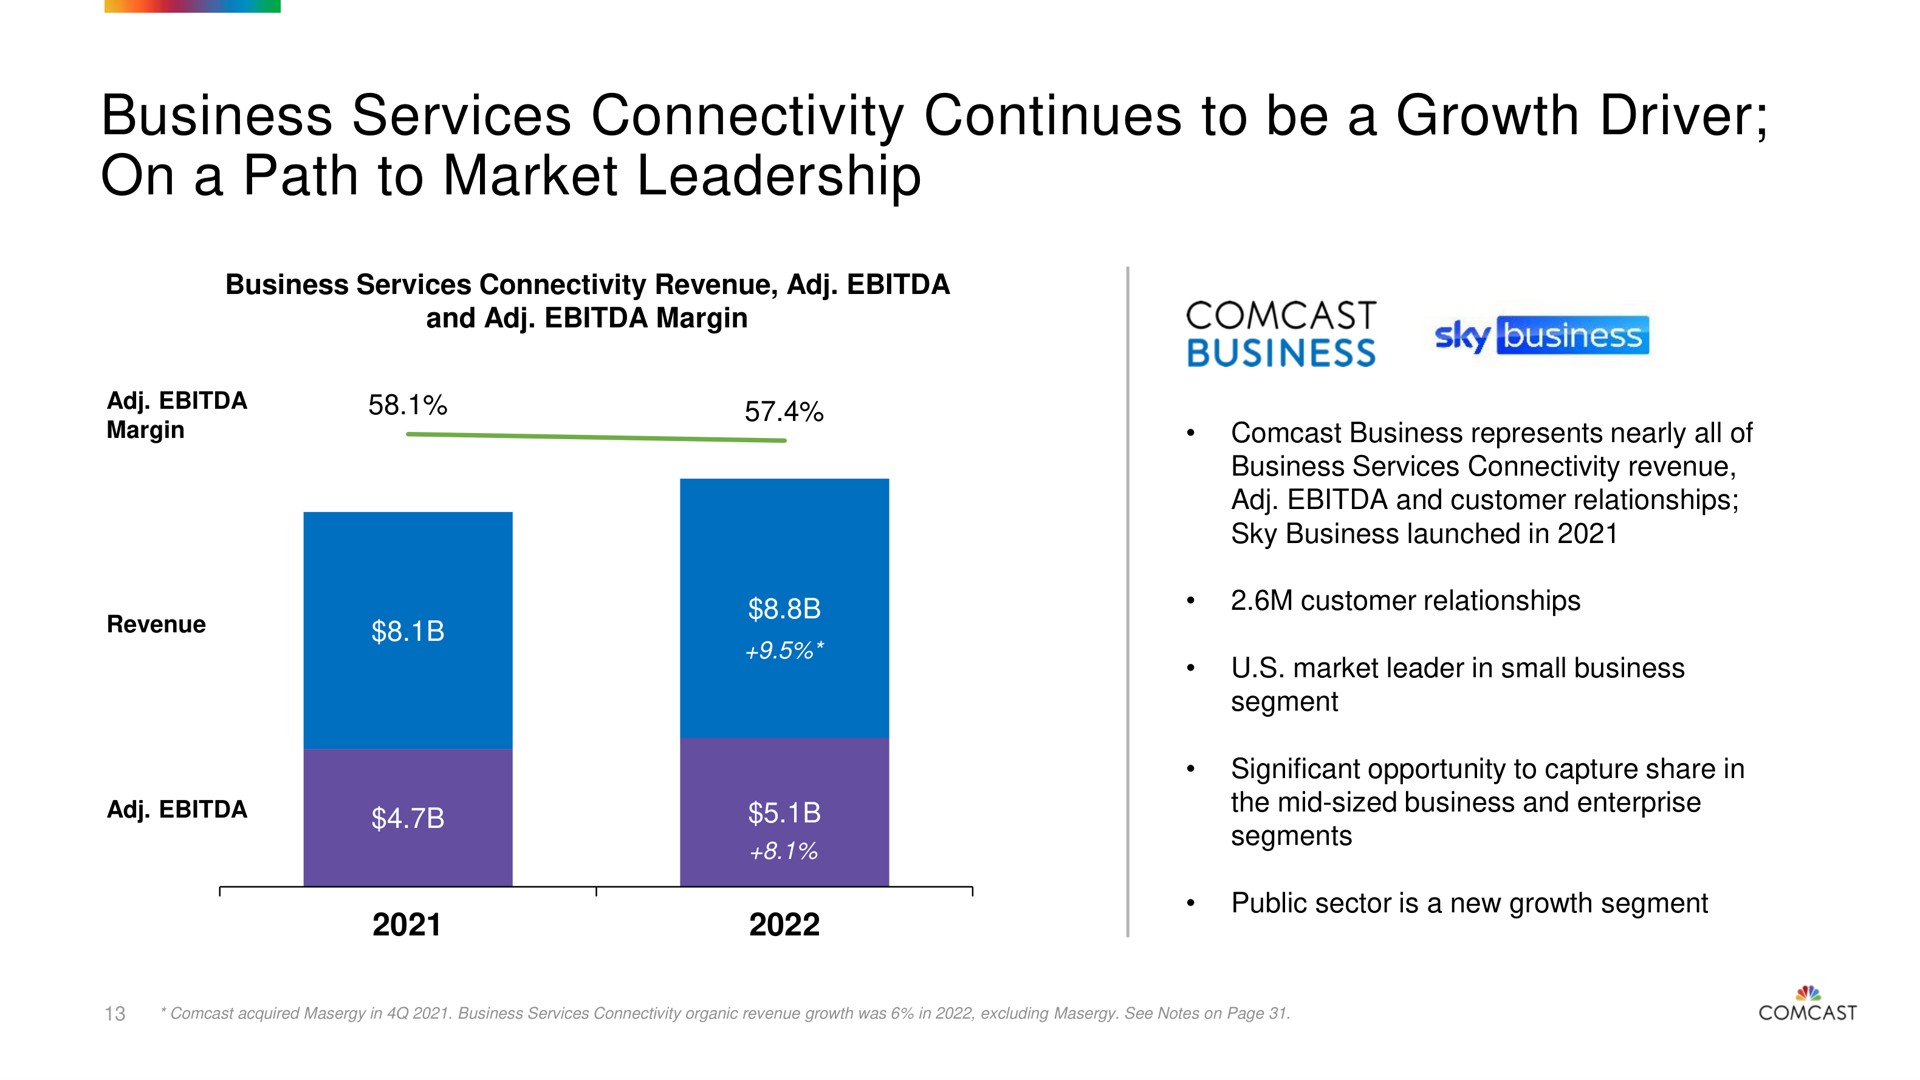 business services connectivity continues to be a growth driver on a path to market leadership | Comcast